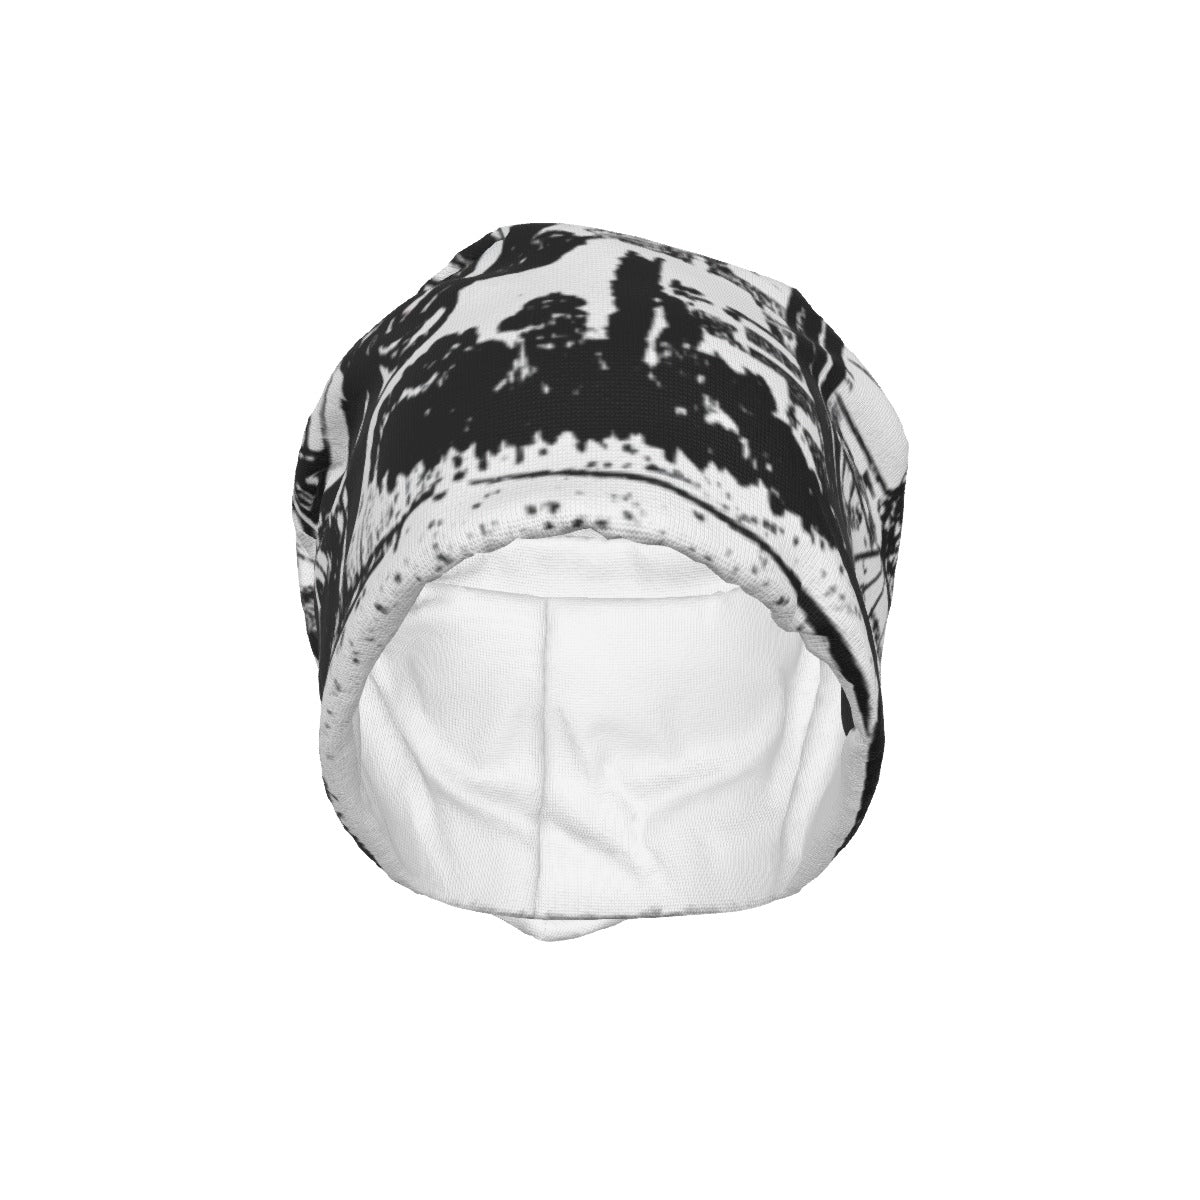 All-Over Print Unisex Beanie Hat